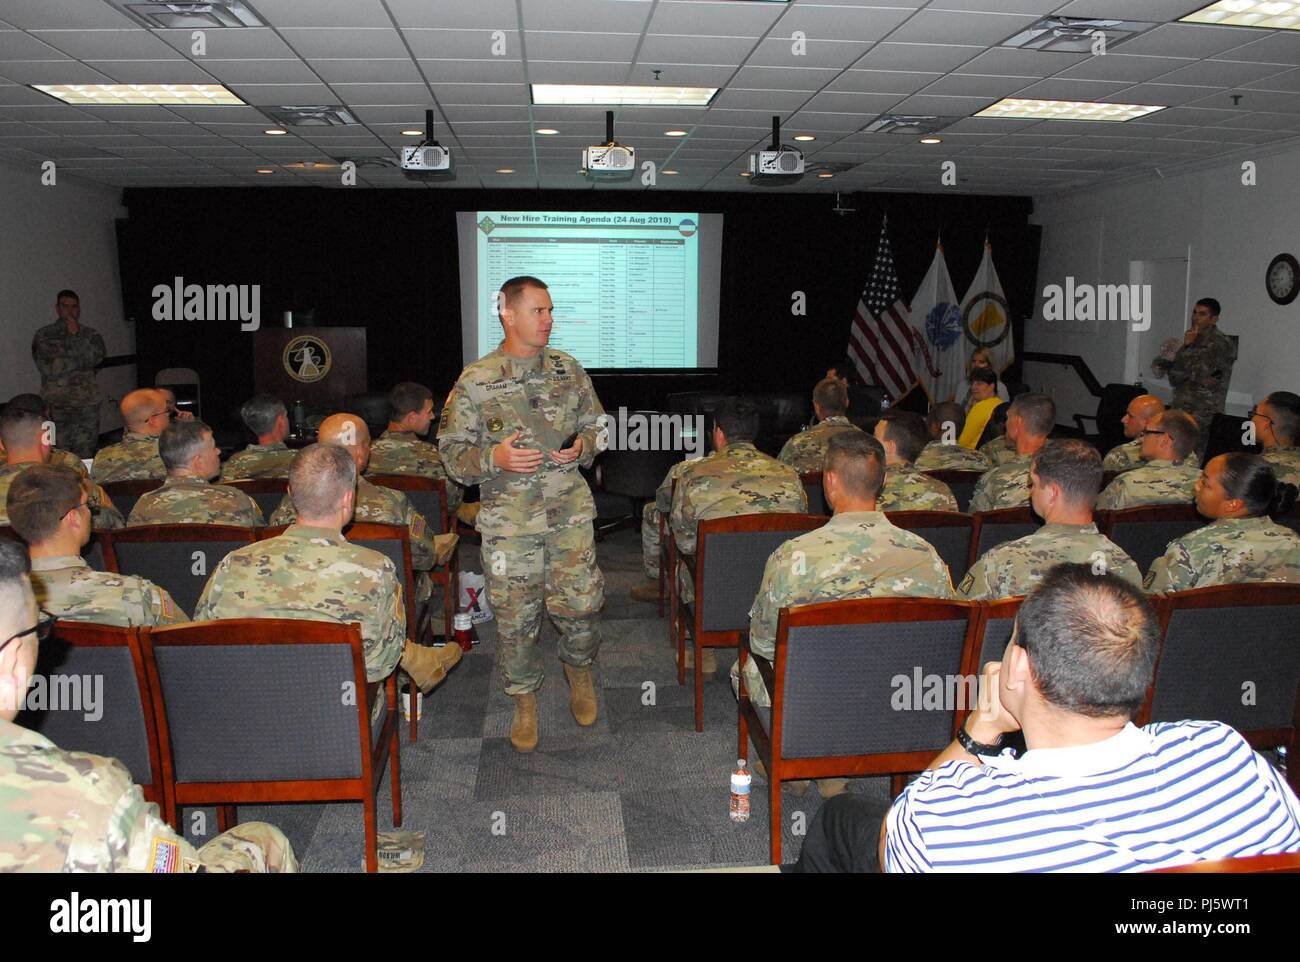 https://c8.alamy.com/comp/PJ5WT1/command-sgt-maj-kenneth-graham-20th-cbrne-command-addresses-soldiers-and-civilians-new-to-the-unit-on-his-expectations-during-the-onboarding-briefings-aug-24-at-aberdeen-proving-ground-more-than-50-soldiers-and-civilians-received-first-hand-information-about-a-one-of-a-kind-army-unit-during-the-briefings-PJ5WT1.jpg